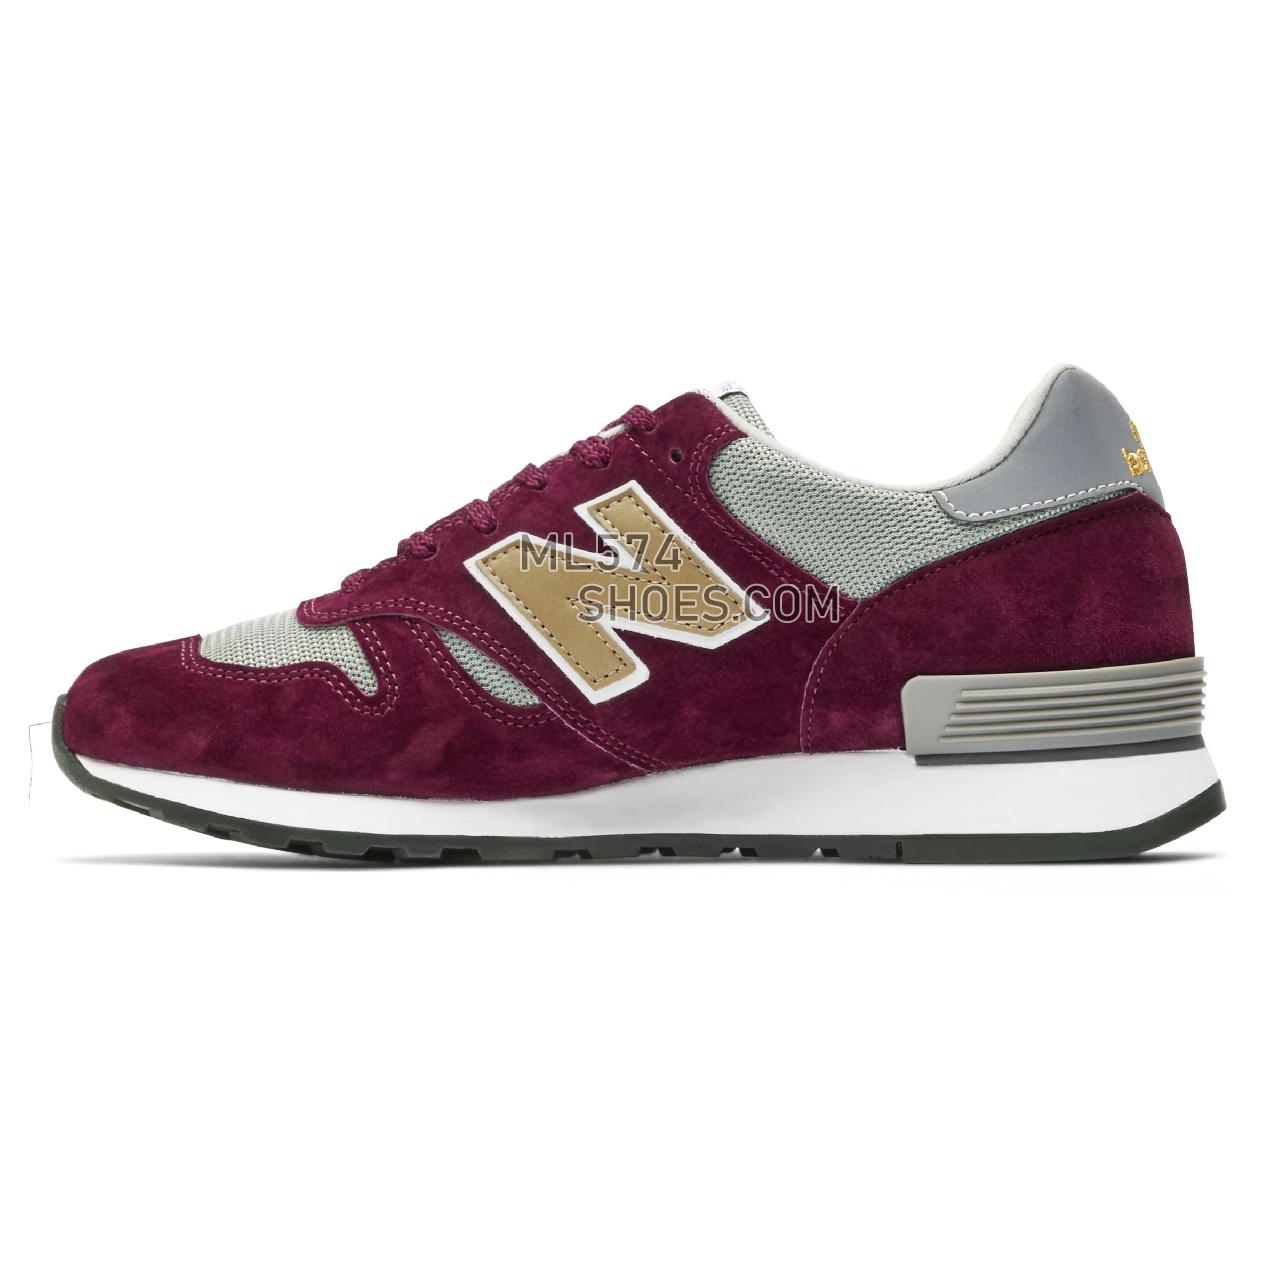 New Balance MADE in UK 670 - Men's Made in USA And UK Sneakers - Burgundy with Grey and Gold - M670BGW